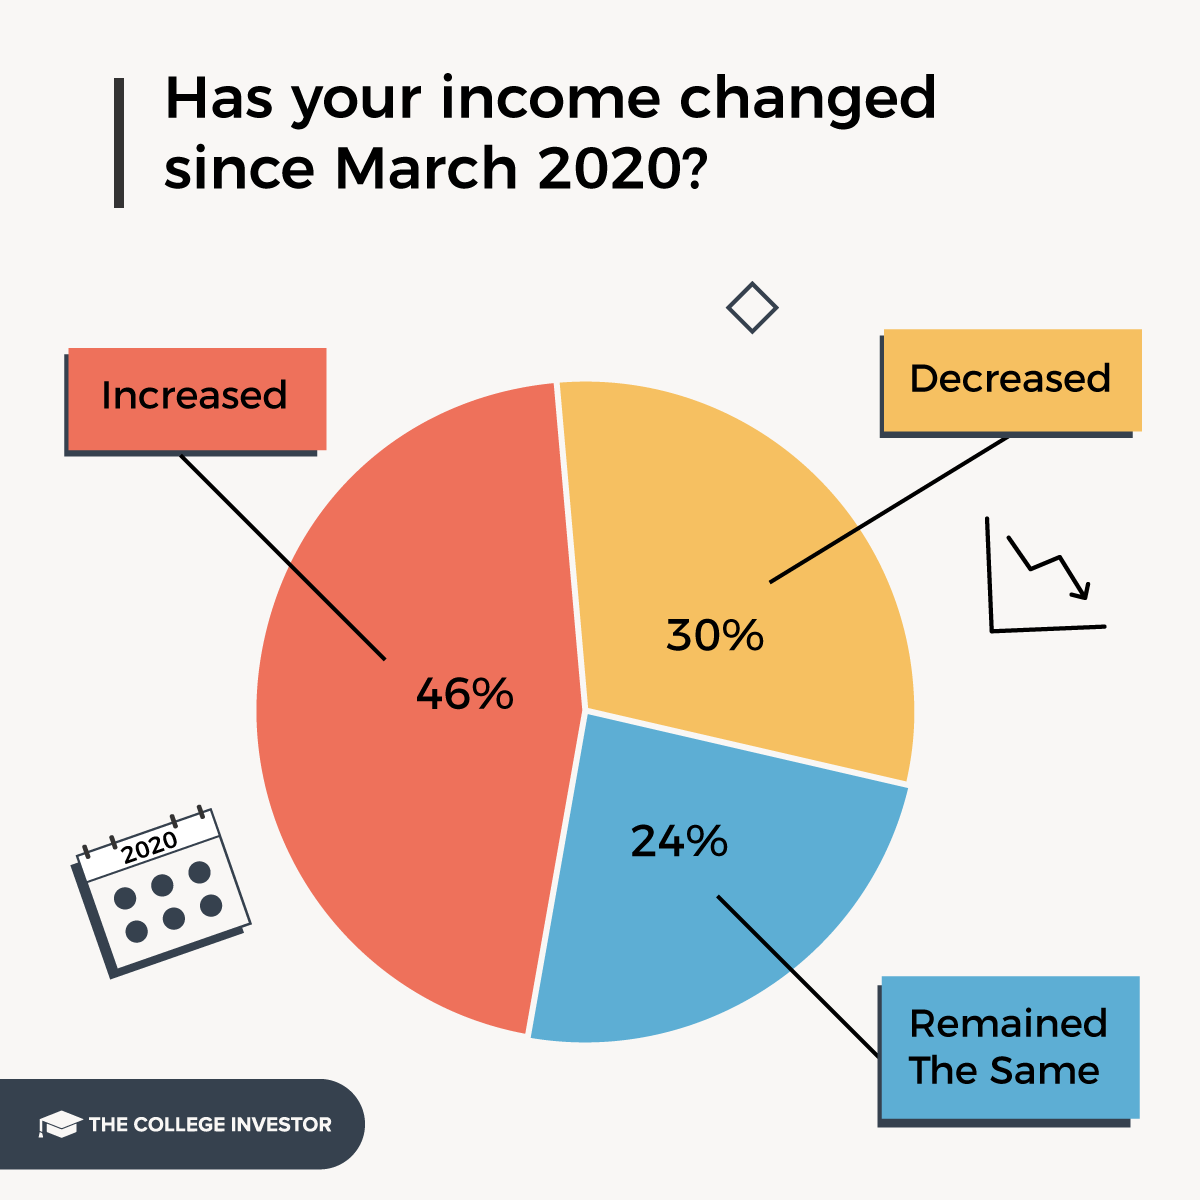 The majority of student loan borrowers have not seen their income increase since March 2020